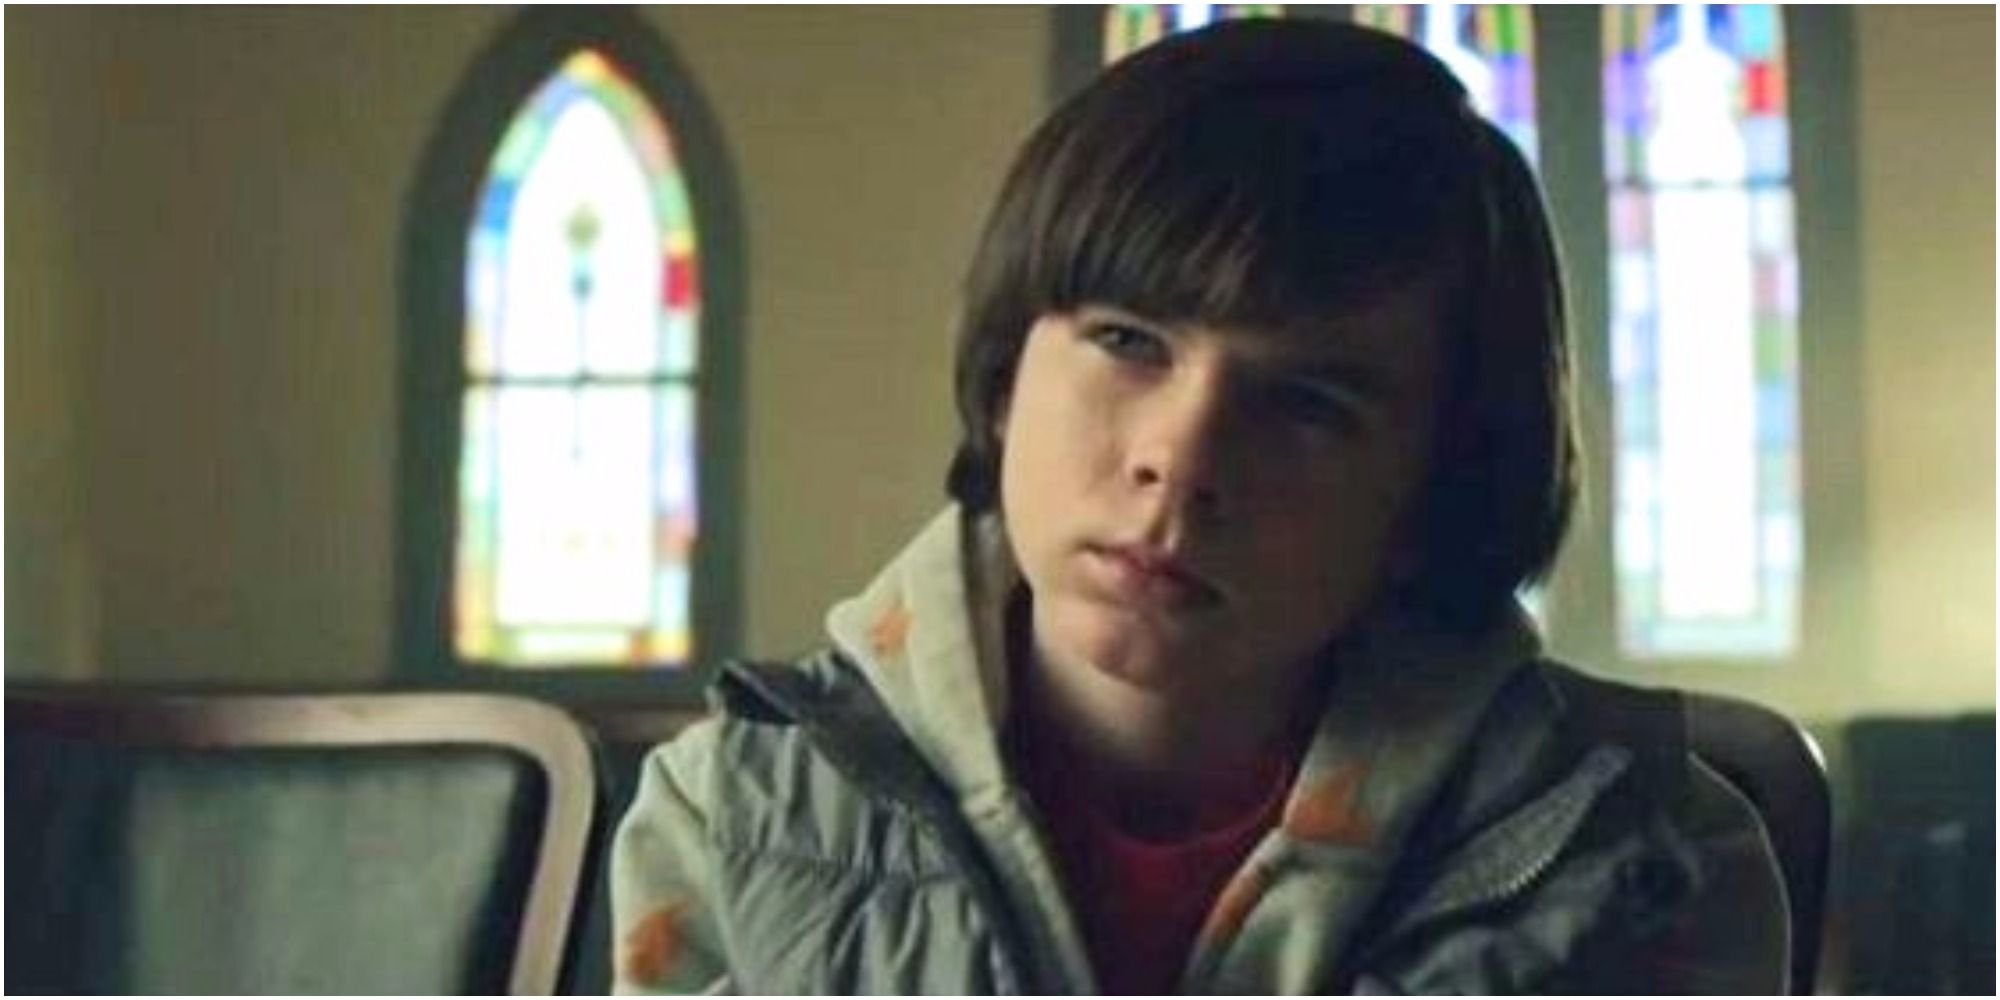 Chandler Riggs starred in an adaptation of Stephen Kings Gramma in 2014. Called Mercy.